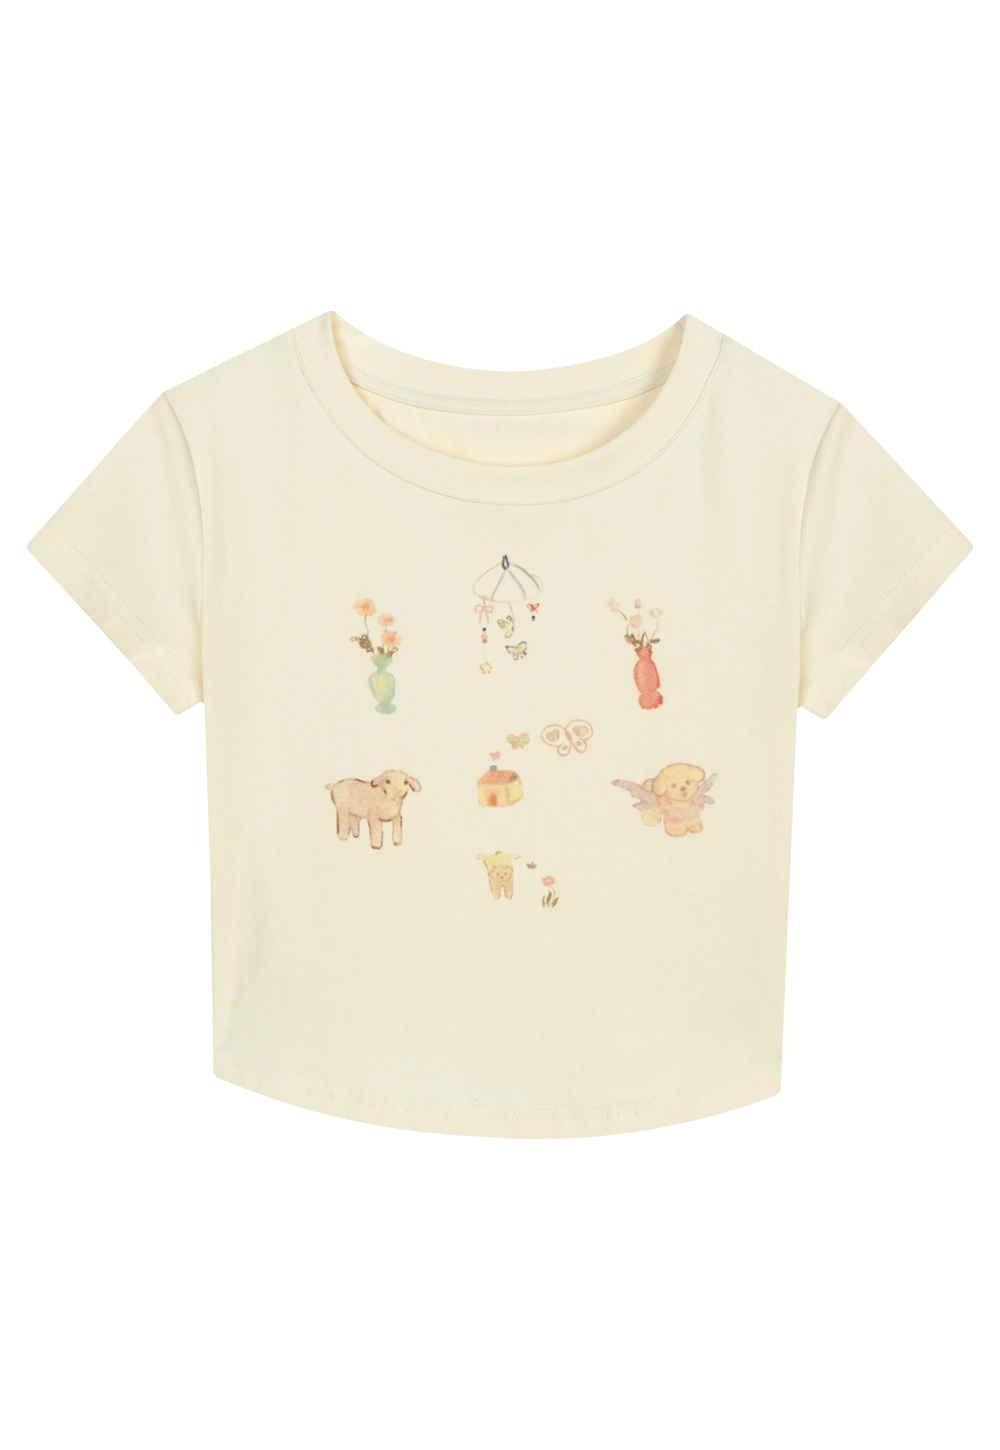 Women's Cute Animal and Floral Graphic T-Shirt